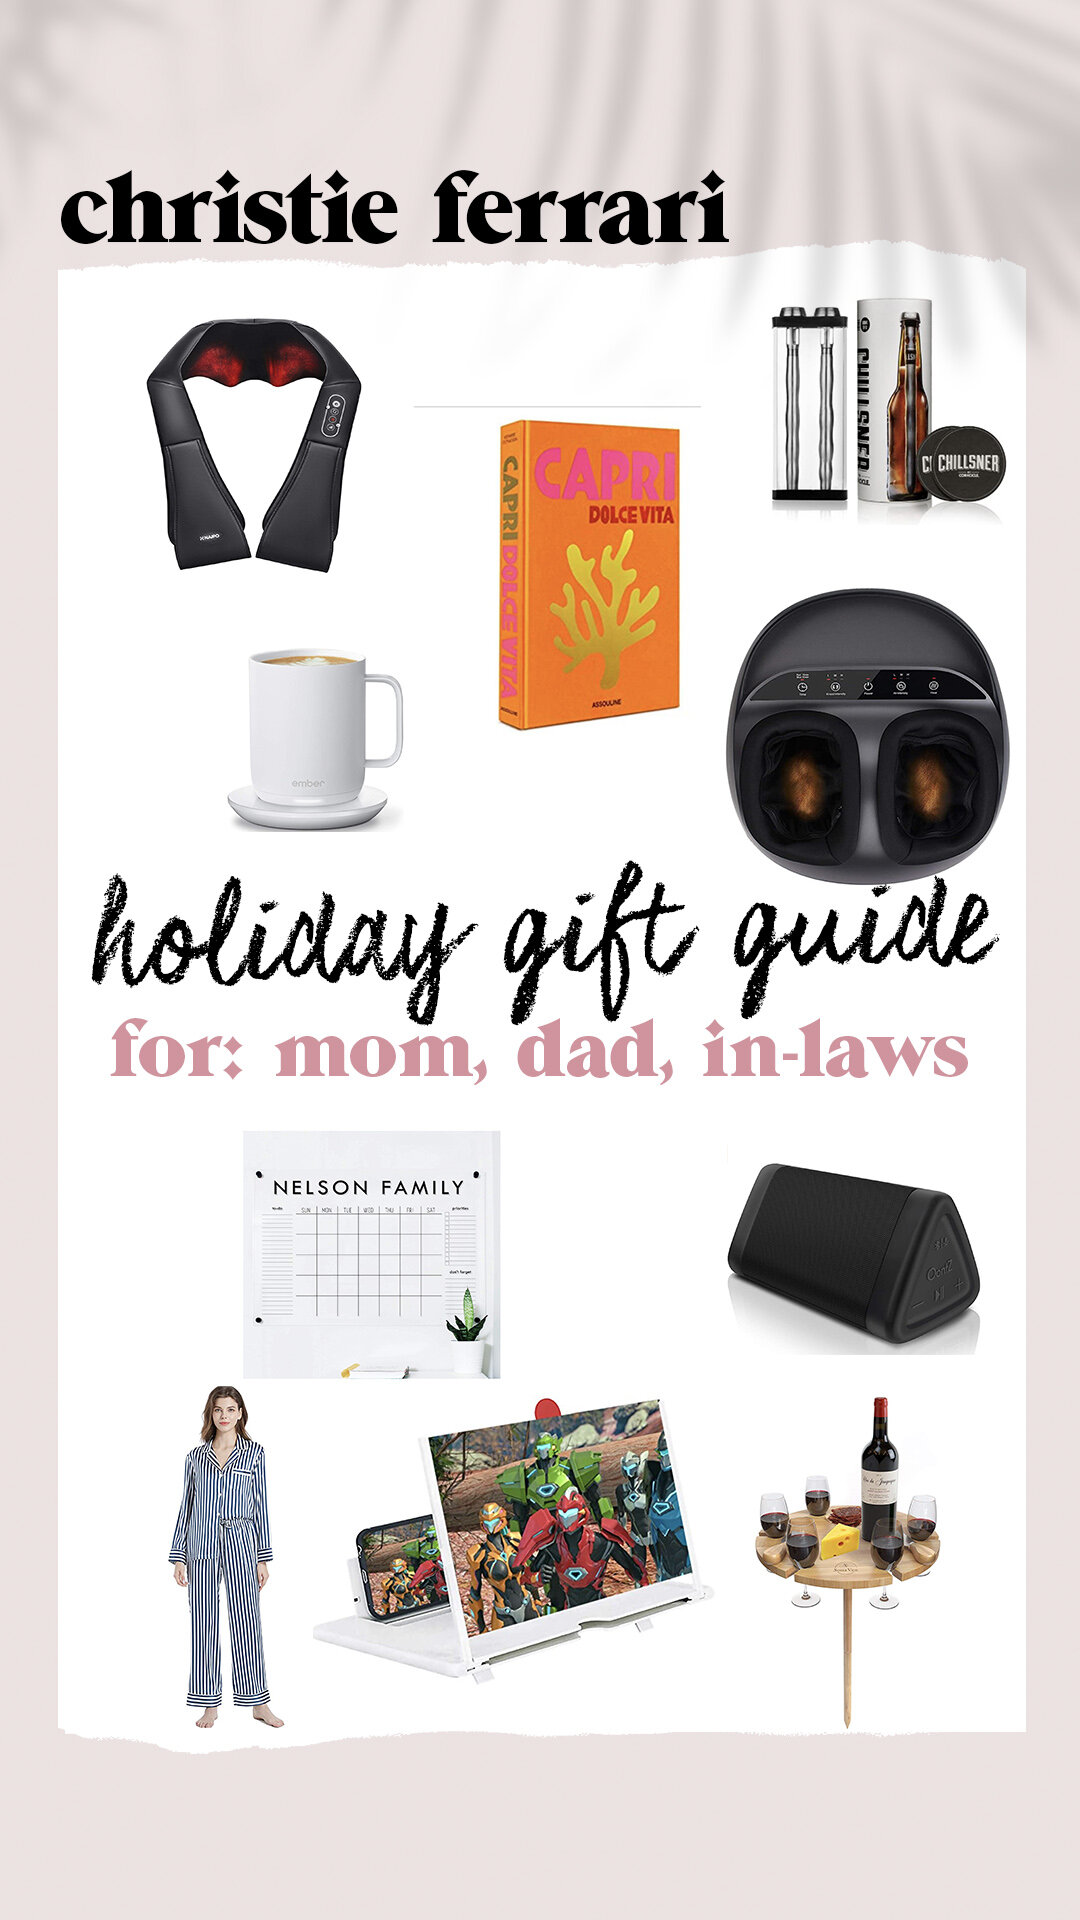 Gift Guide: Fun gifts for mom, dad or the in-laws! — christie ferrari